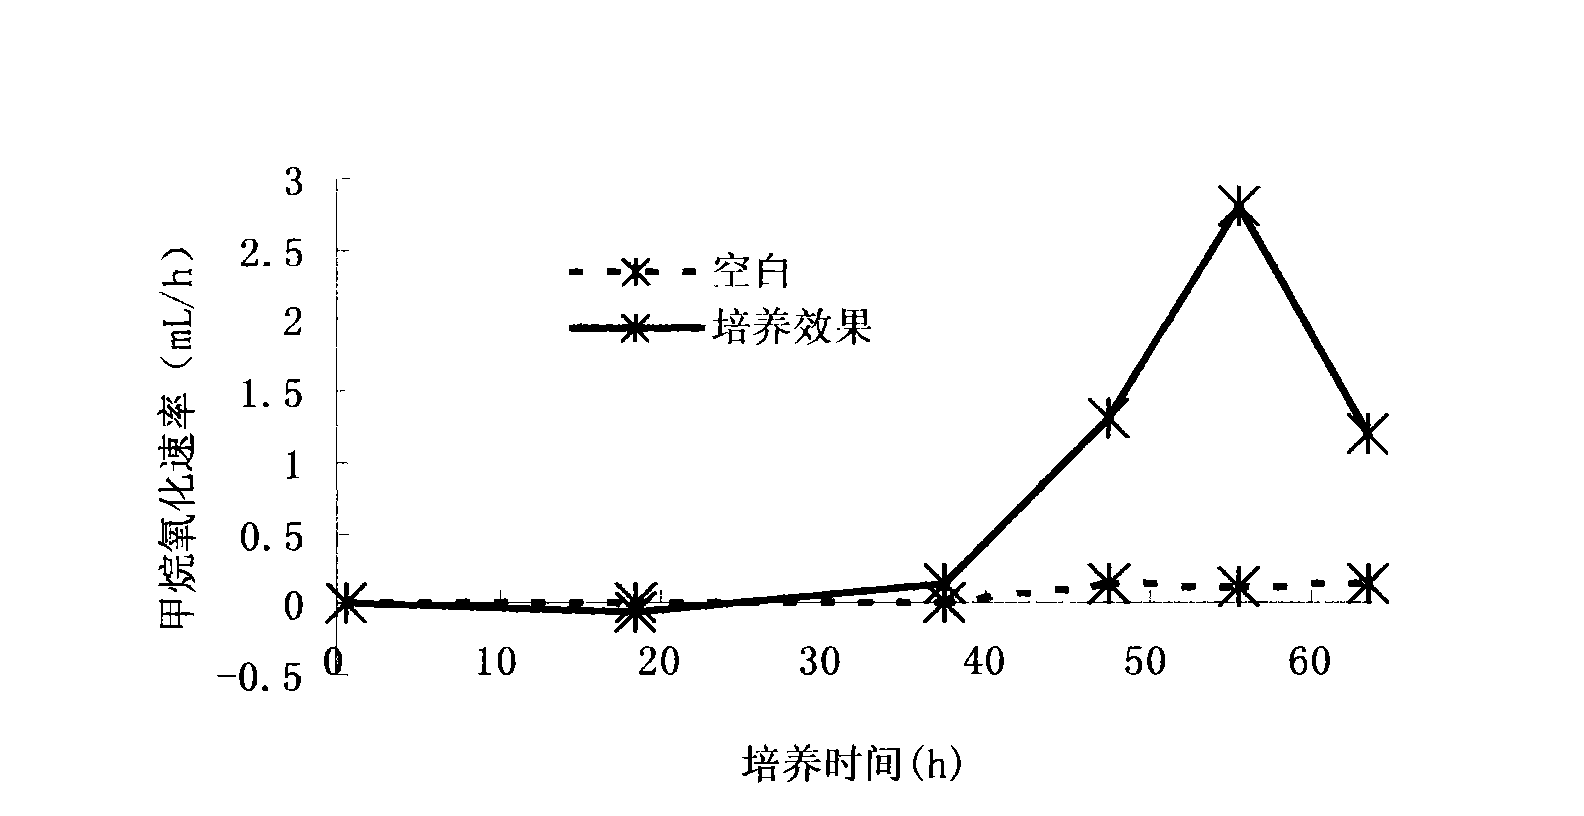 Process for producing methyl hydride oxidized bacteria agent